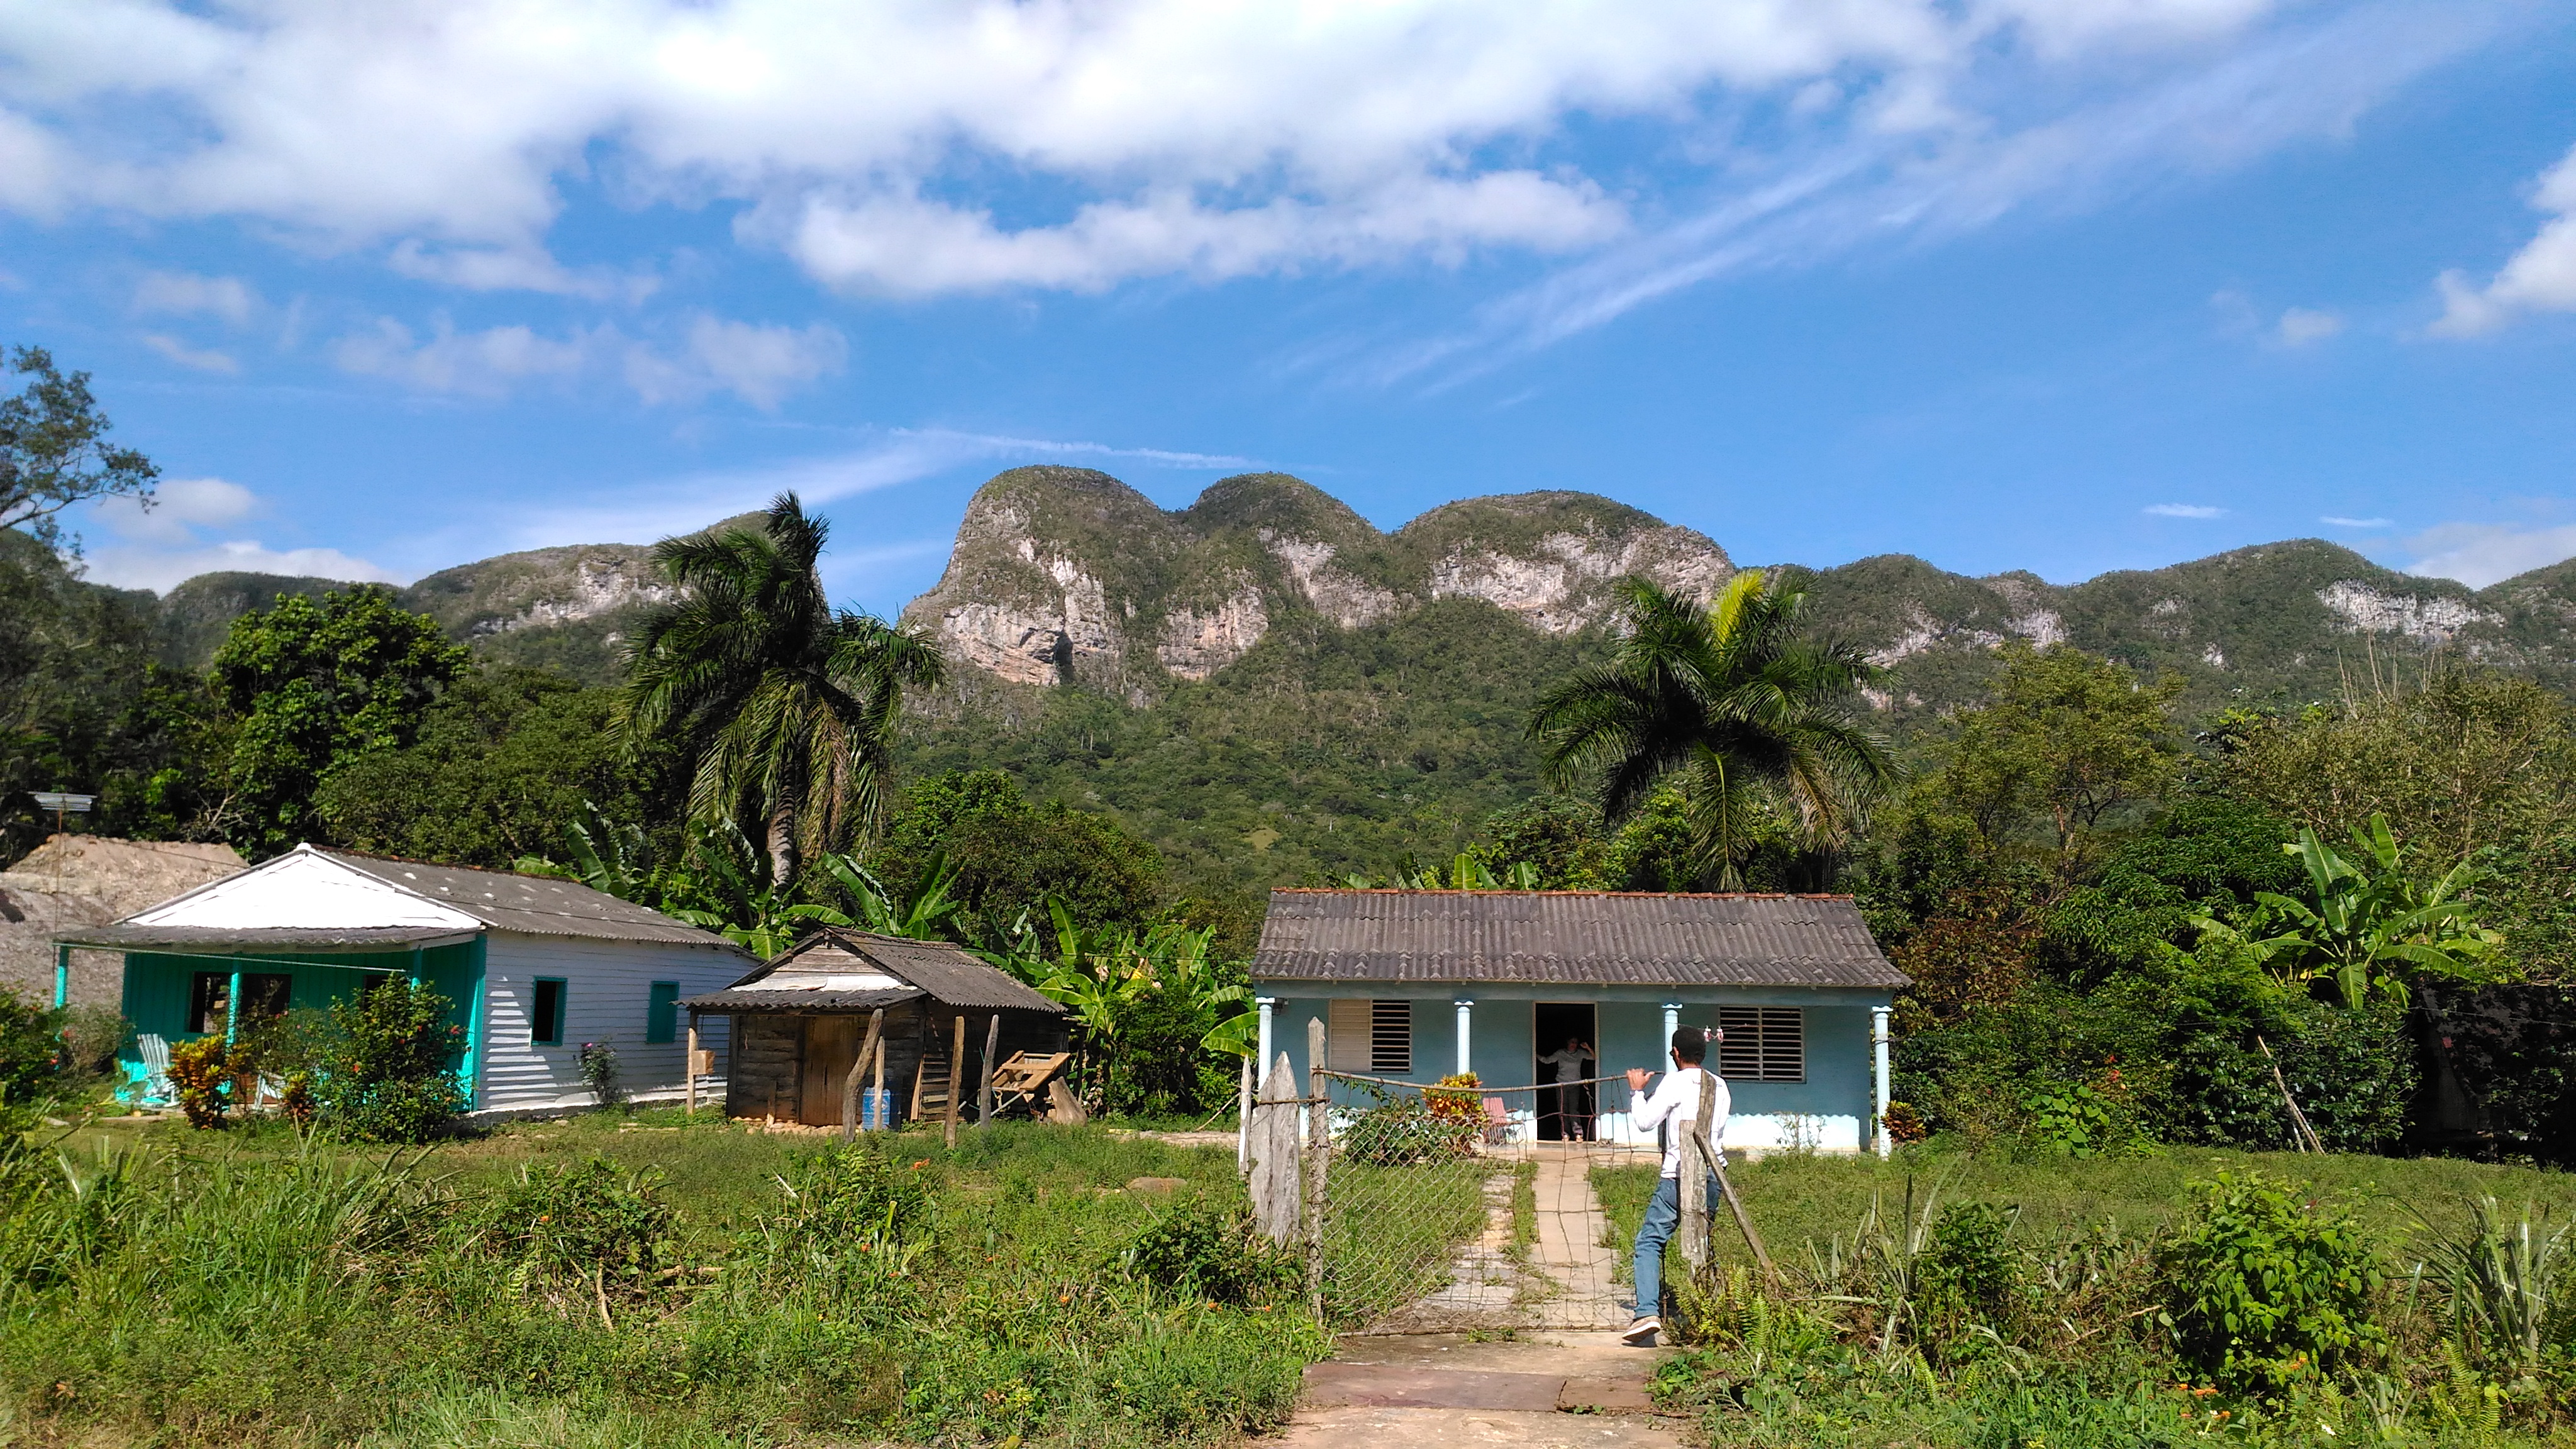 Vinales Valley what to do in vinales cuba where to stay when travelling cuba independently cuba travel guide